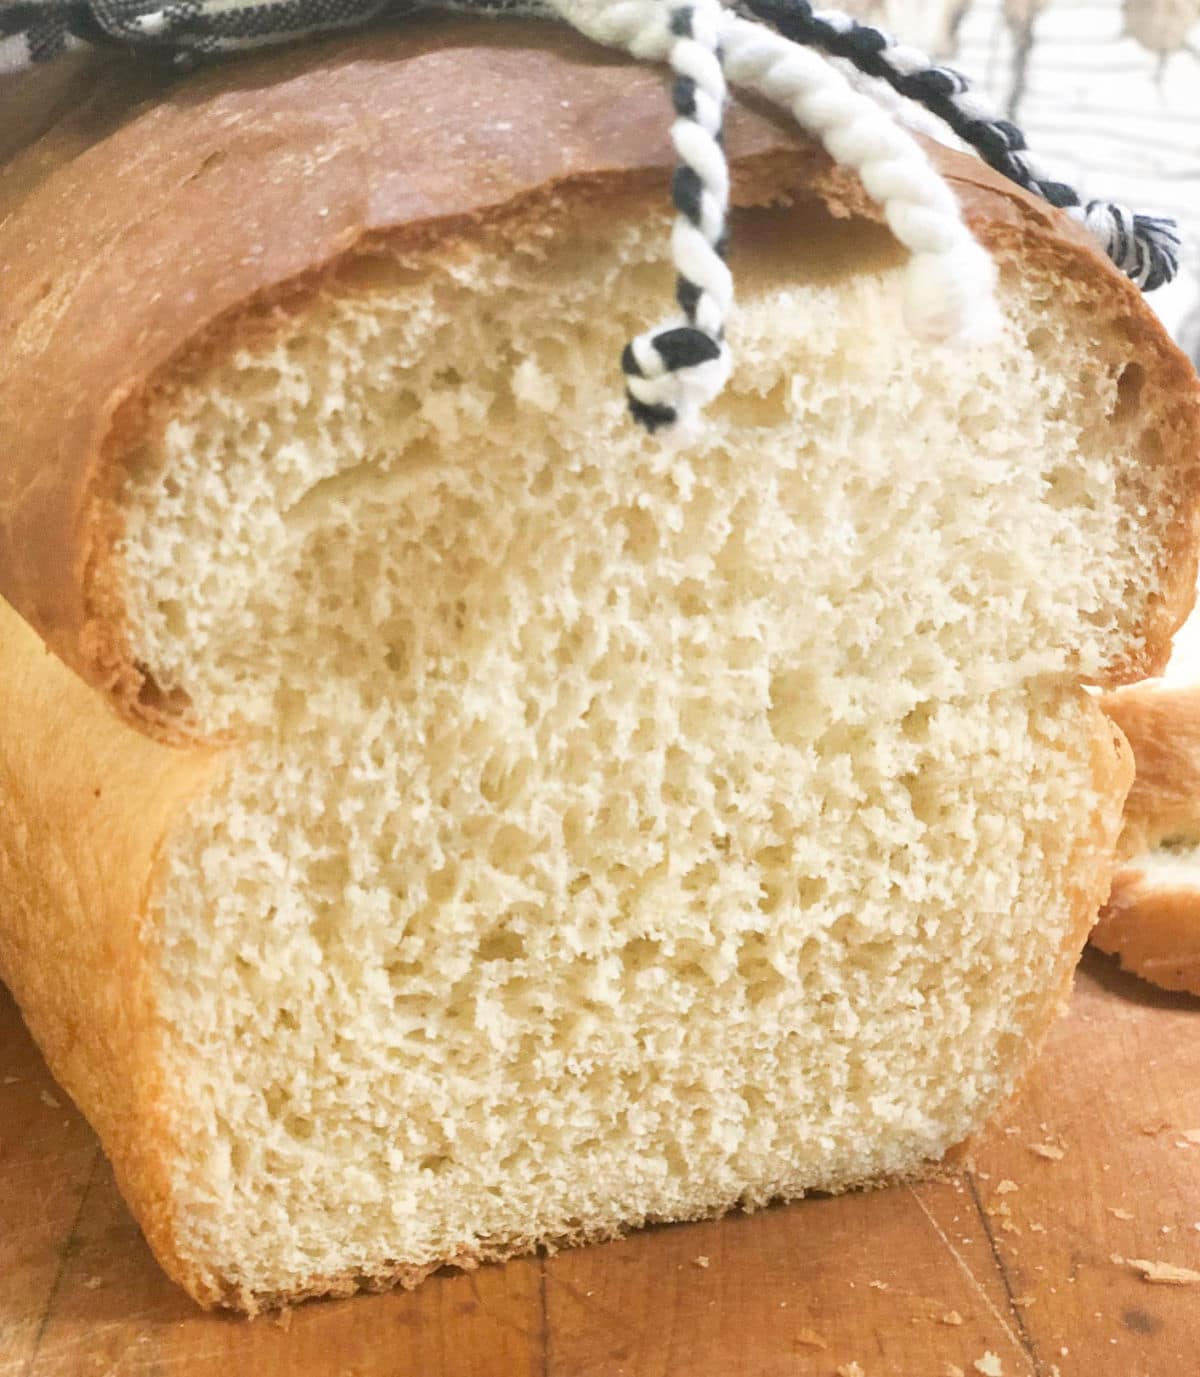 Loaf of buttermilk bread sliced to show interior.